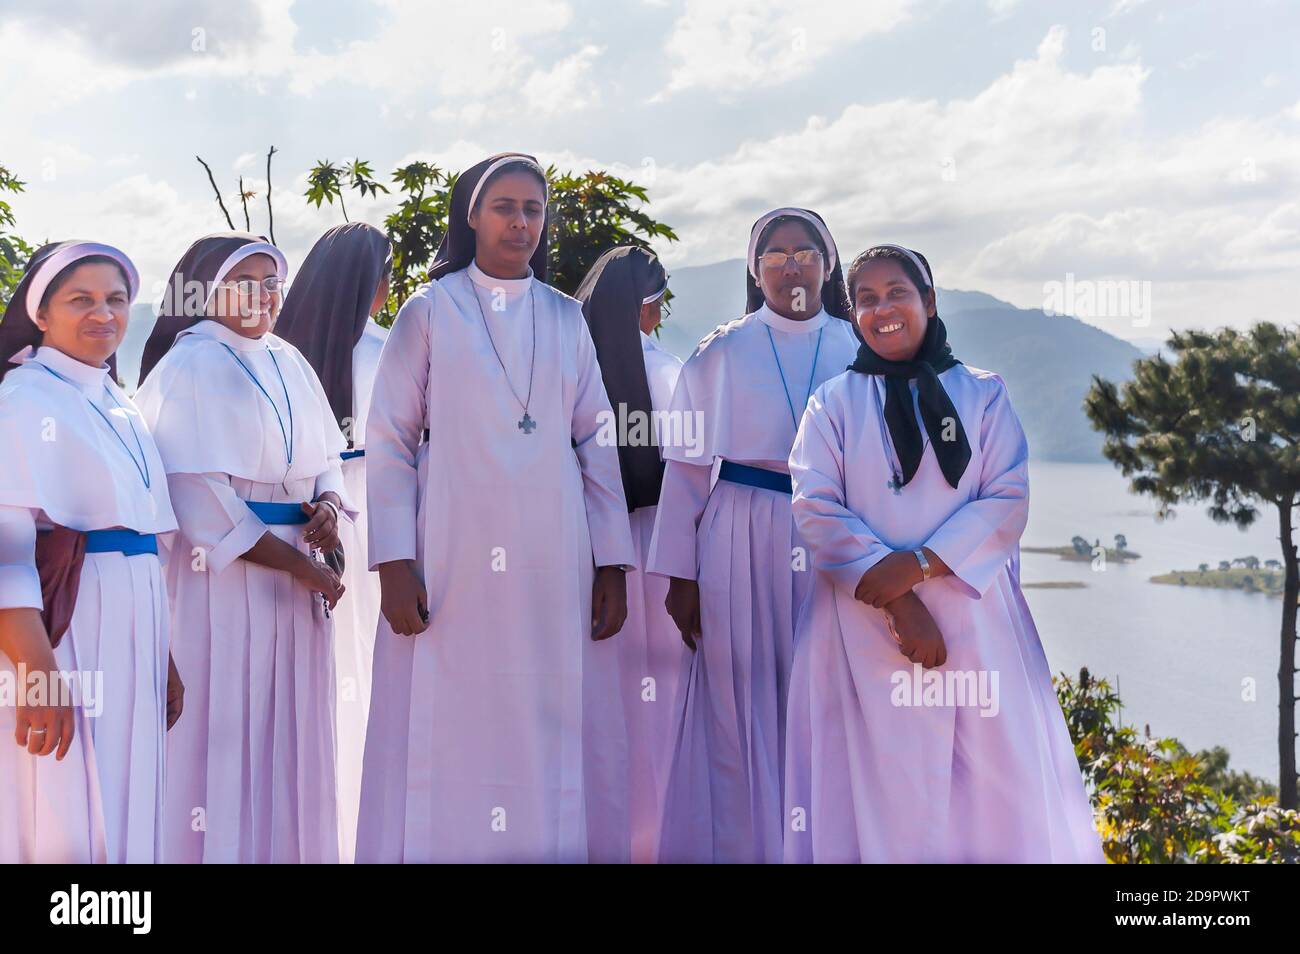 A portrait of a group of nuns of Asian Indian ethnicity visiting the Umiam lake on the outskirts of Shillong, Meghalaya, India. Stock Photo